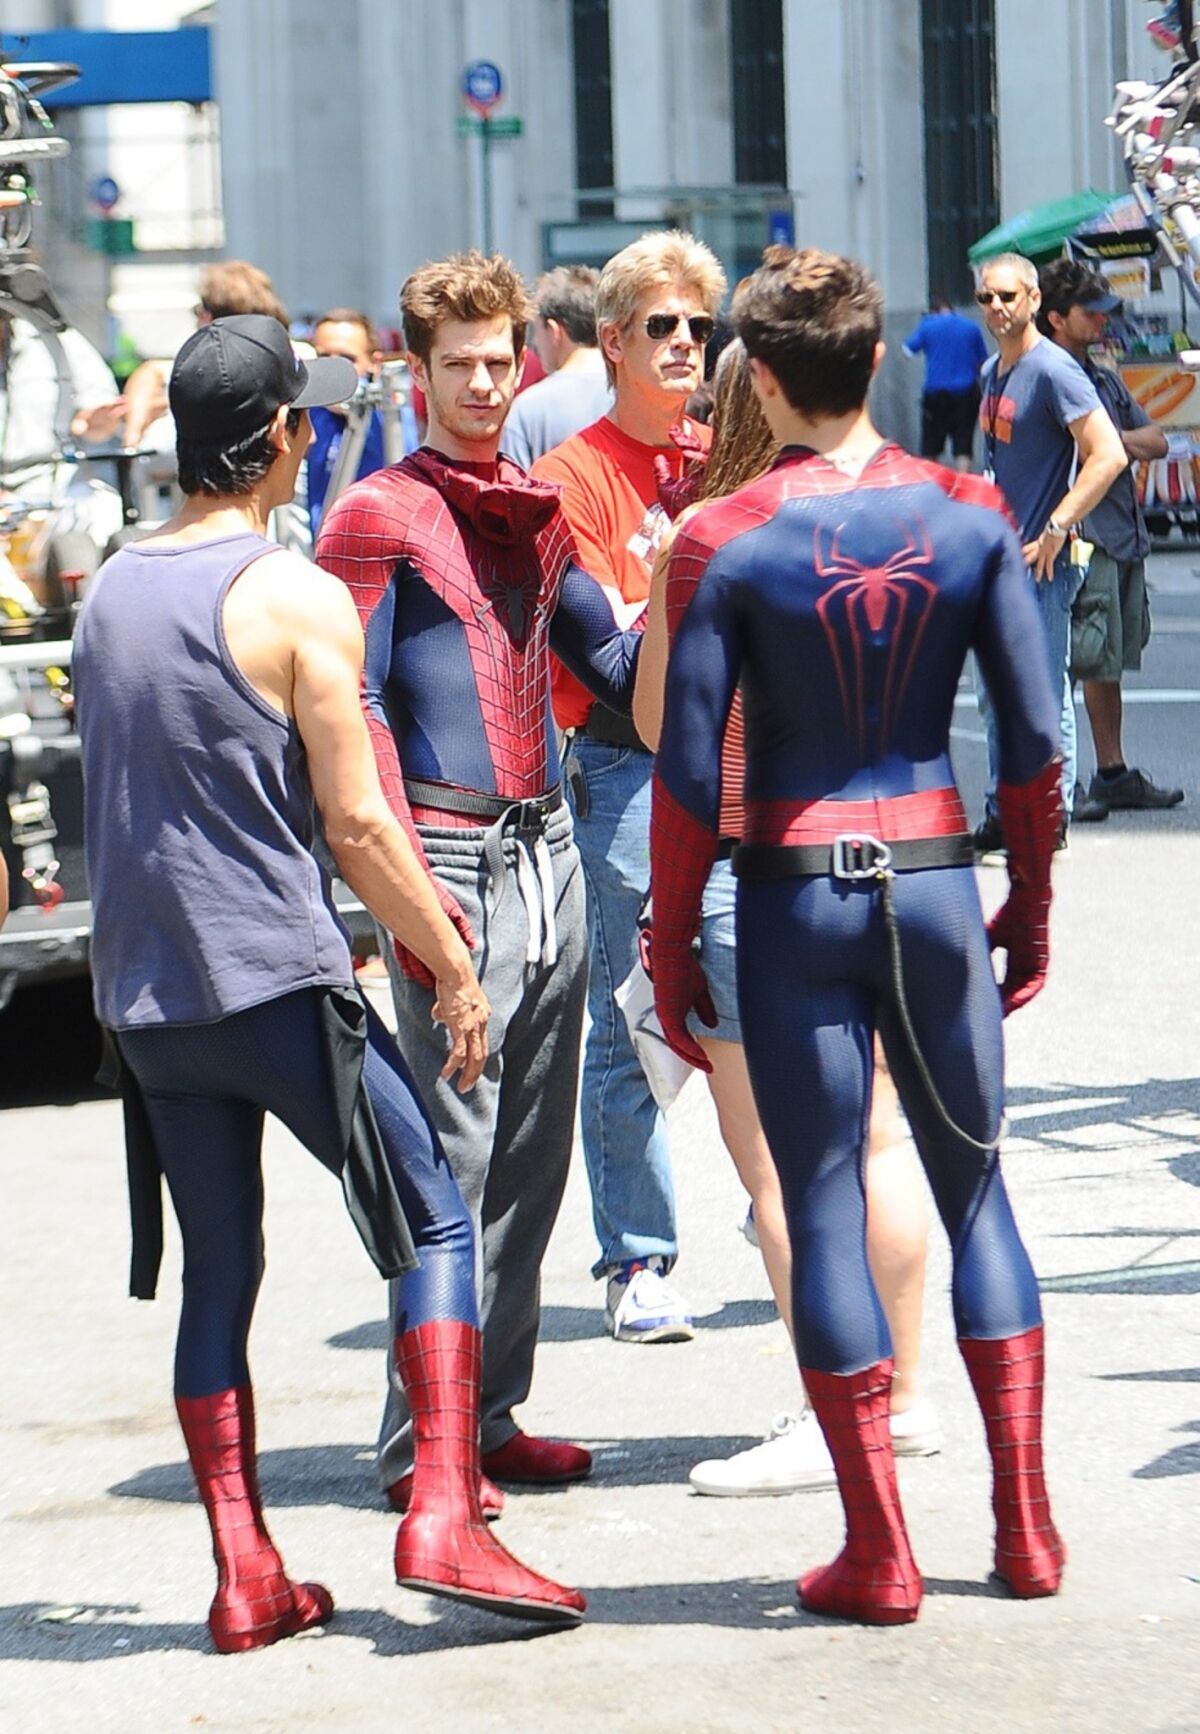 Actor Andrew Garfield, center left, is seen on the set of "The Amazing Spider-Man 2" in New York City with his stunt double William Spencer, right, and a second stunt double.